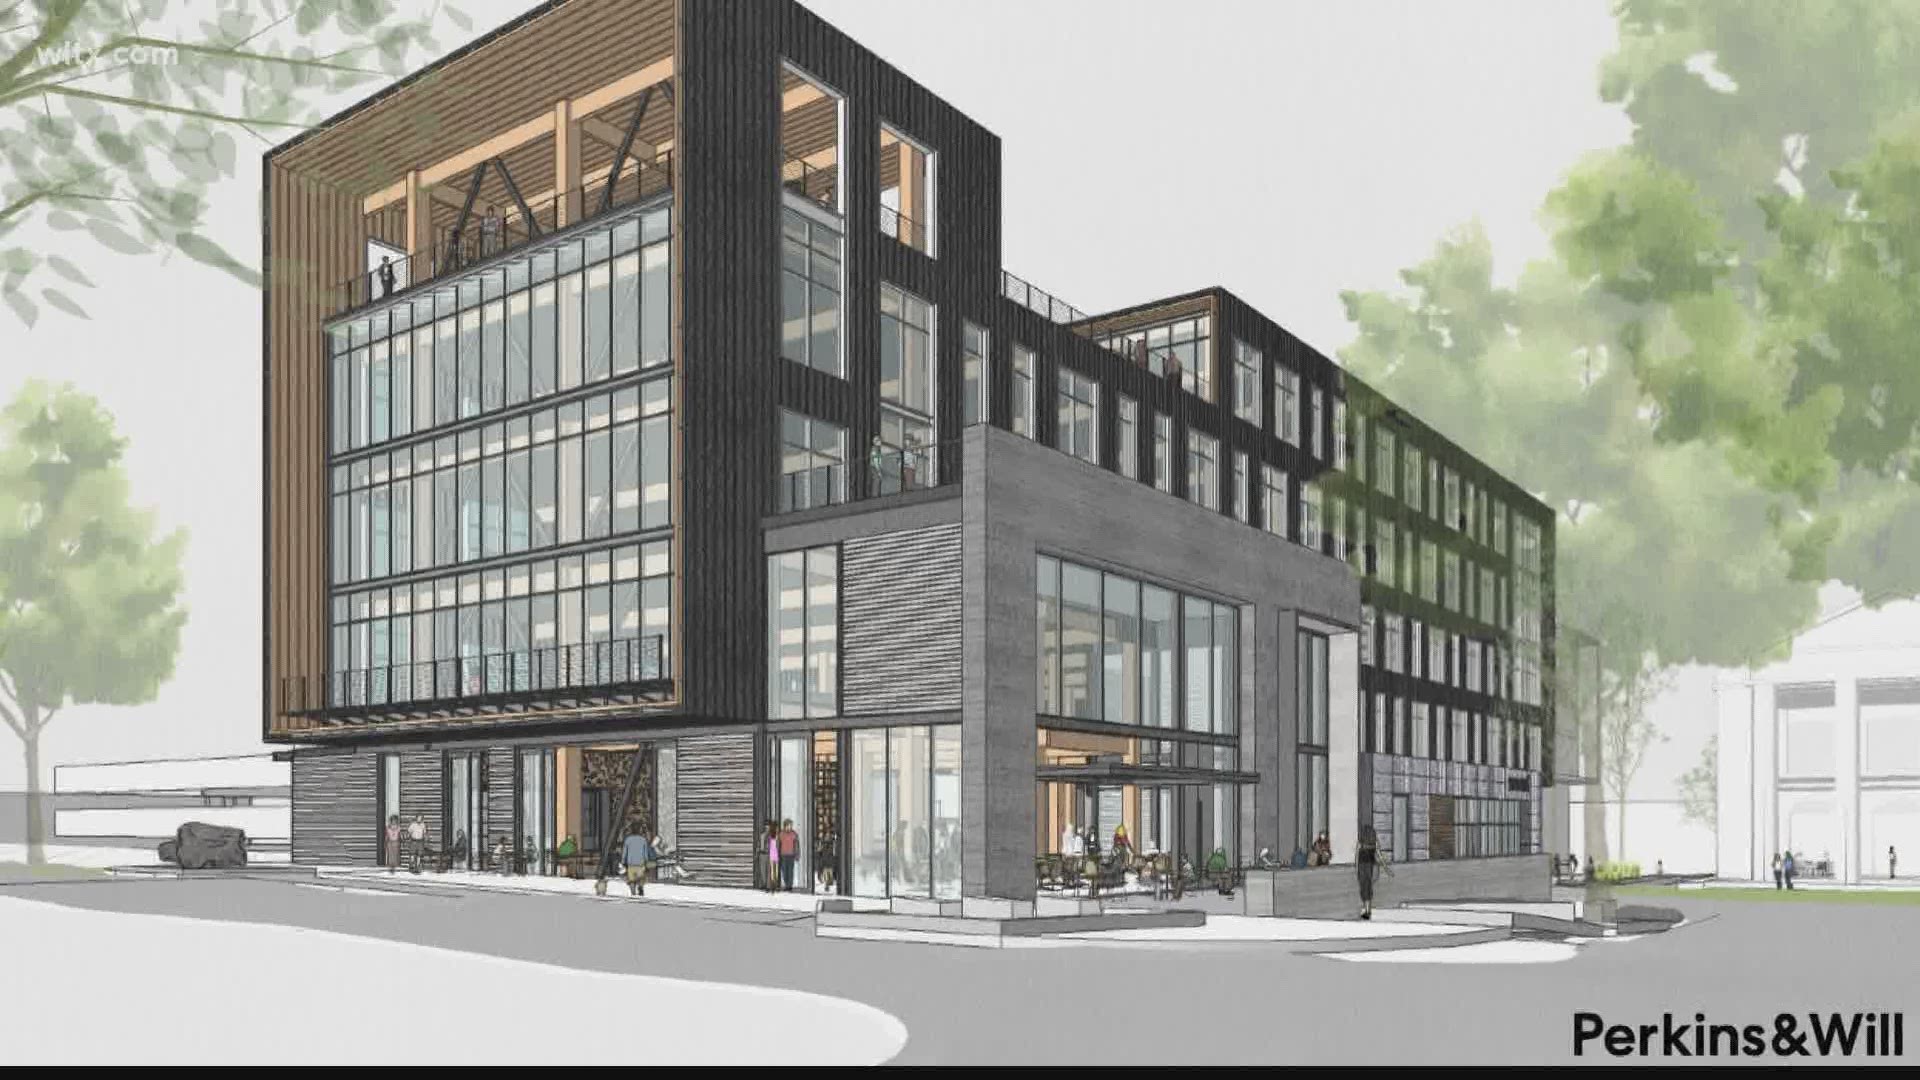 The WestLawn building is set to be completed in 2022 and will be the one building of its kind in Columbia